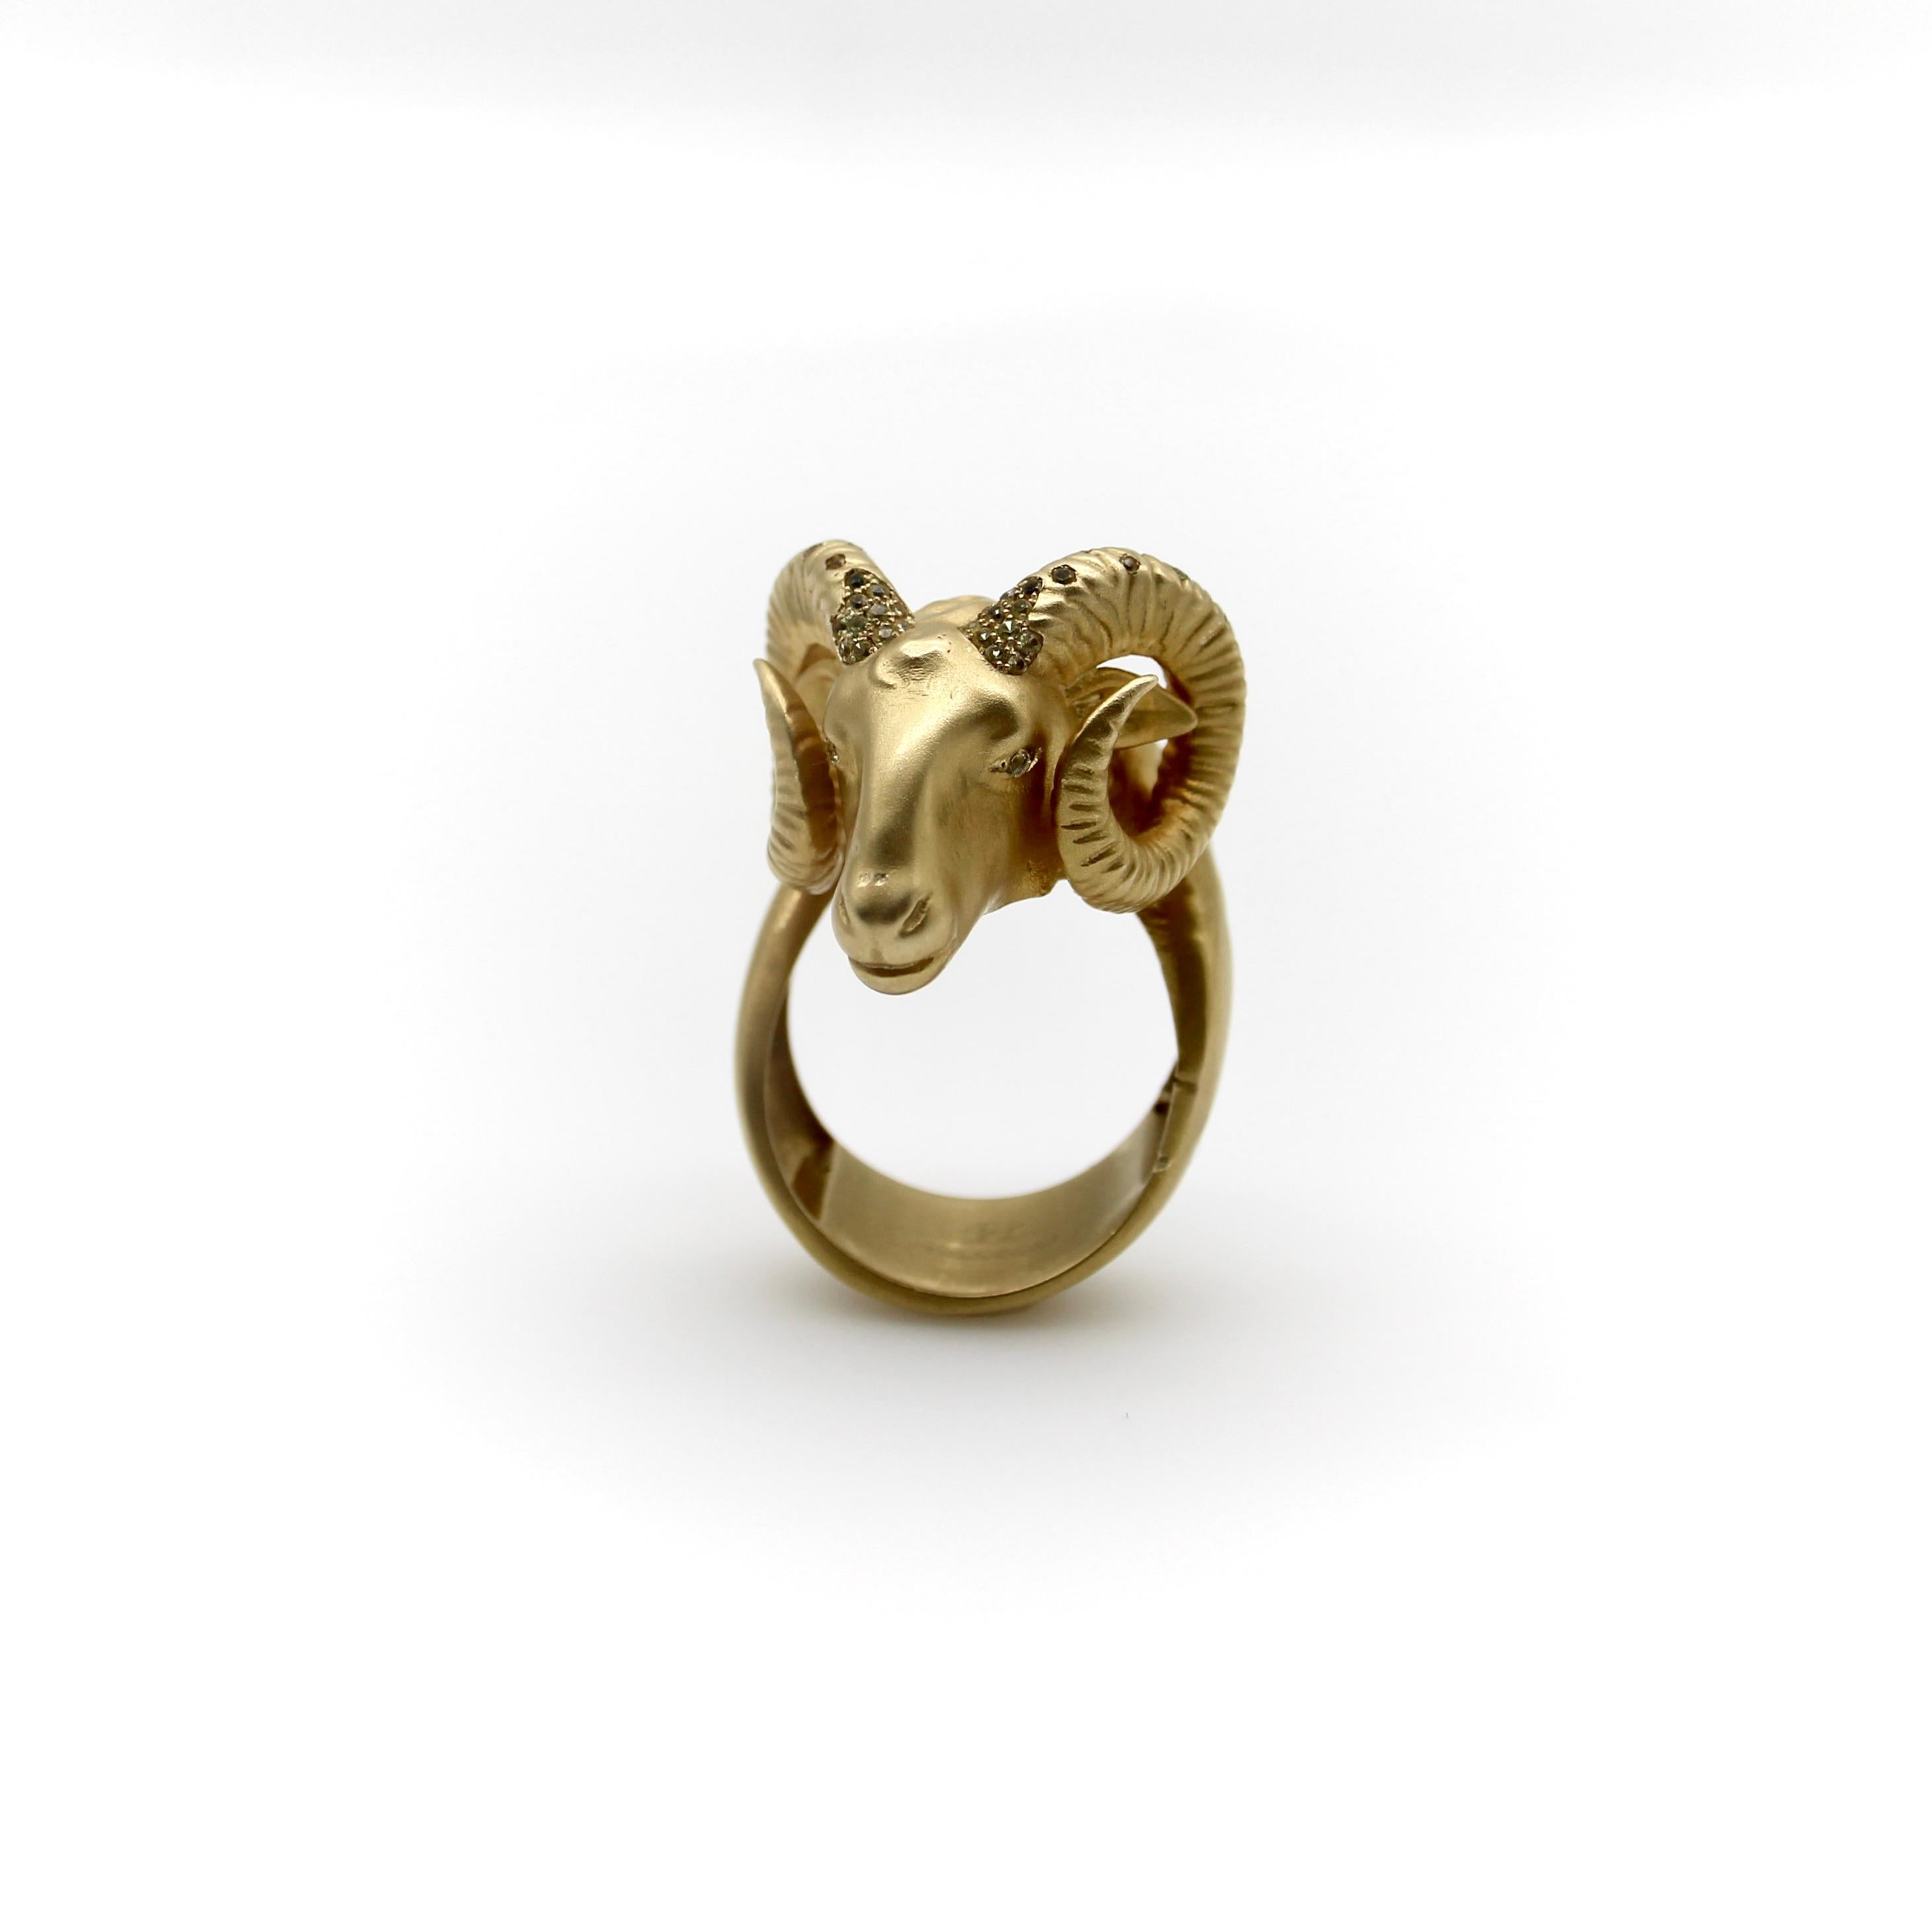 Helannona 14k Gold Ram’s Head Ring with Micro Pave Citrines 3